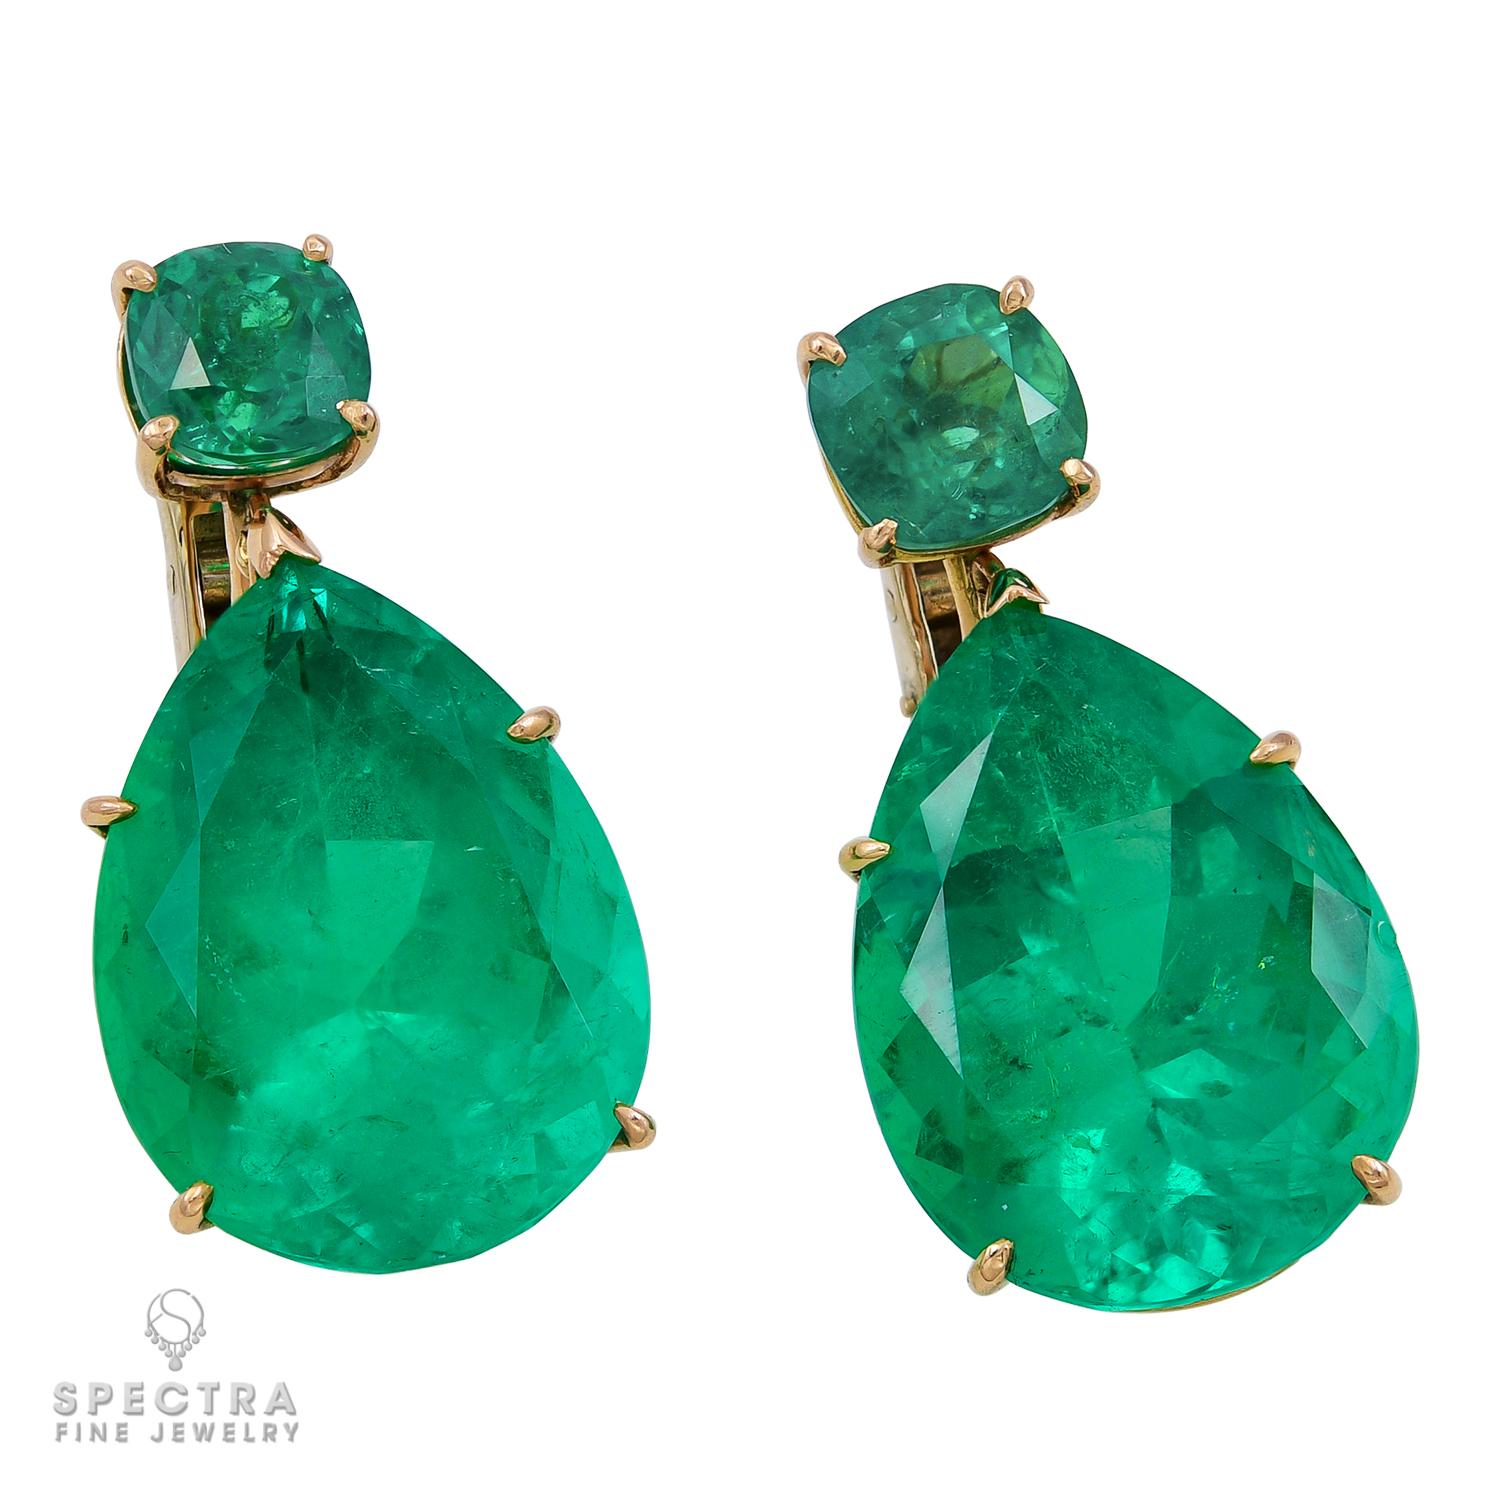 Introducing our stunning pair of drop earrings featuring four breathtaking Colombian emeralds. These earrings are a true statement piece with a total weight of approximately 59 carats. The top of the earrings are adorned with two cushion-shaped